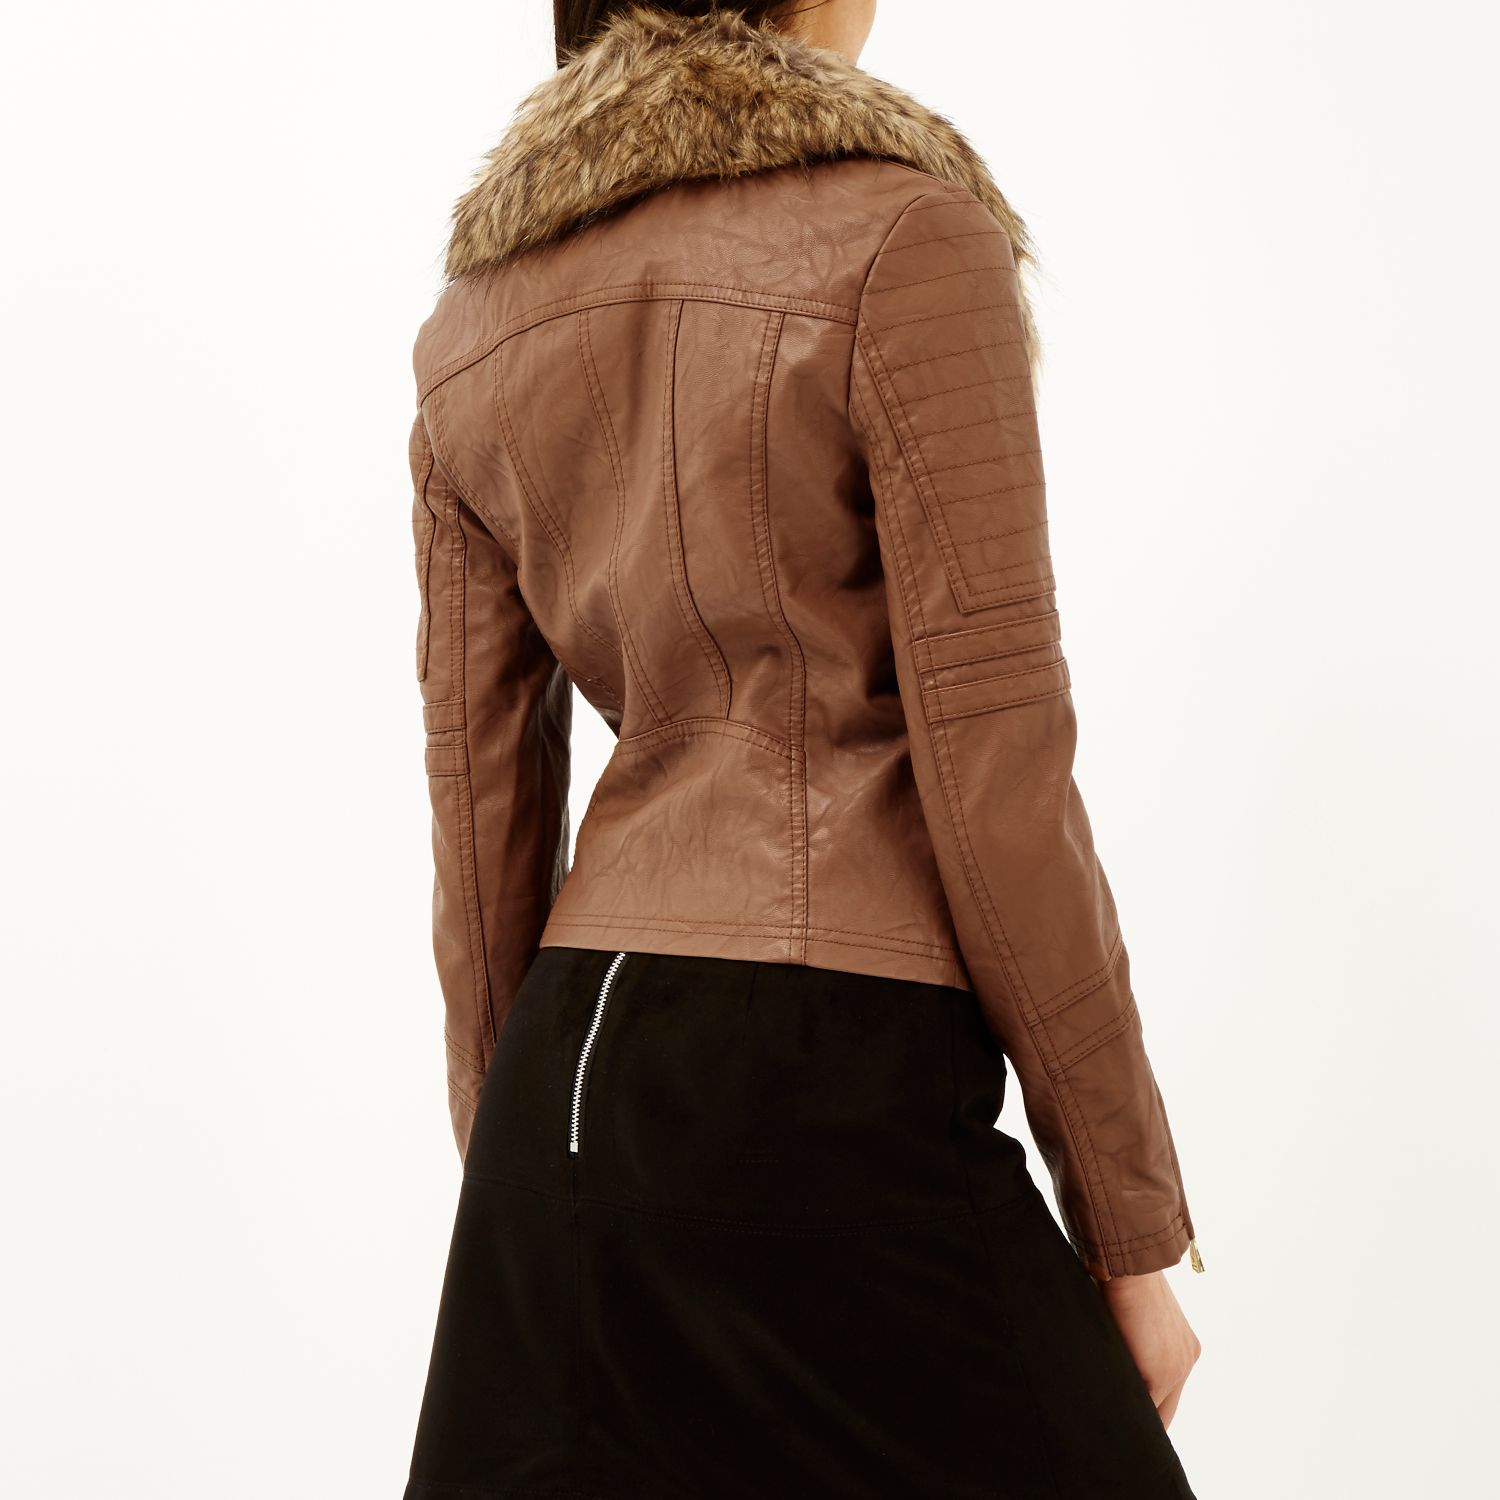 Brown Leather Jacket With Fur - My Jacket